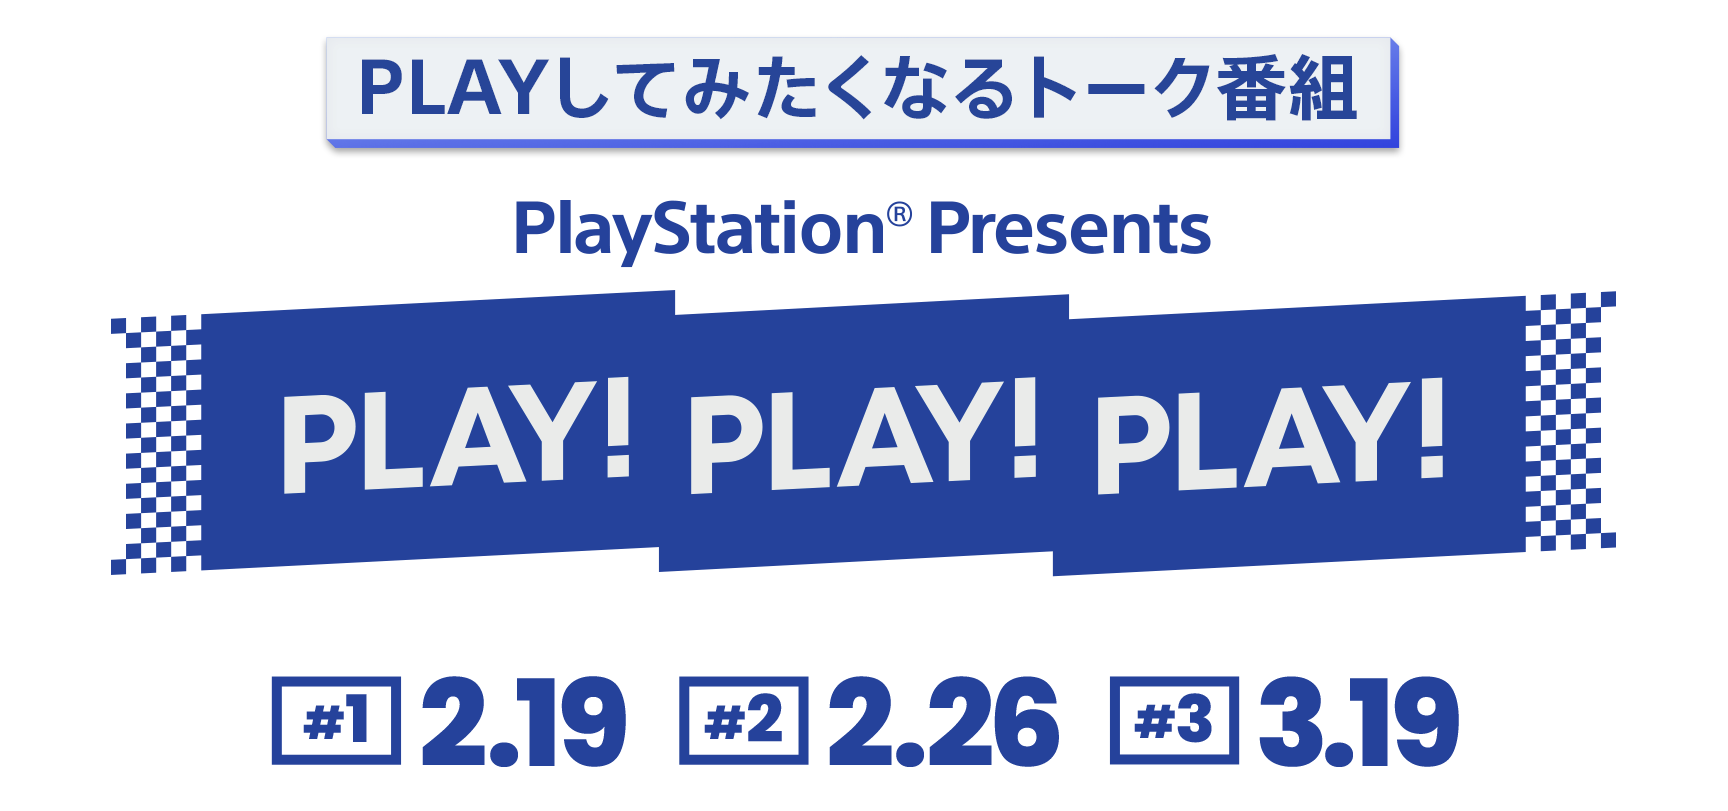 PLAYしてみたくなるトーク番組「PLAY! PLAY! PLAY!」